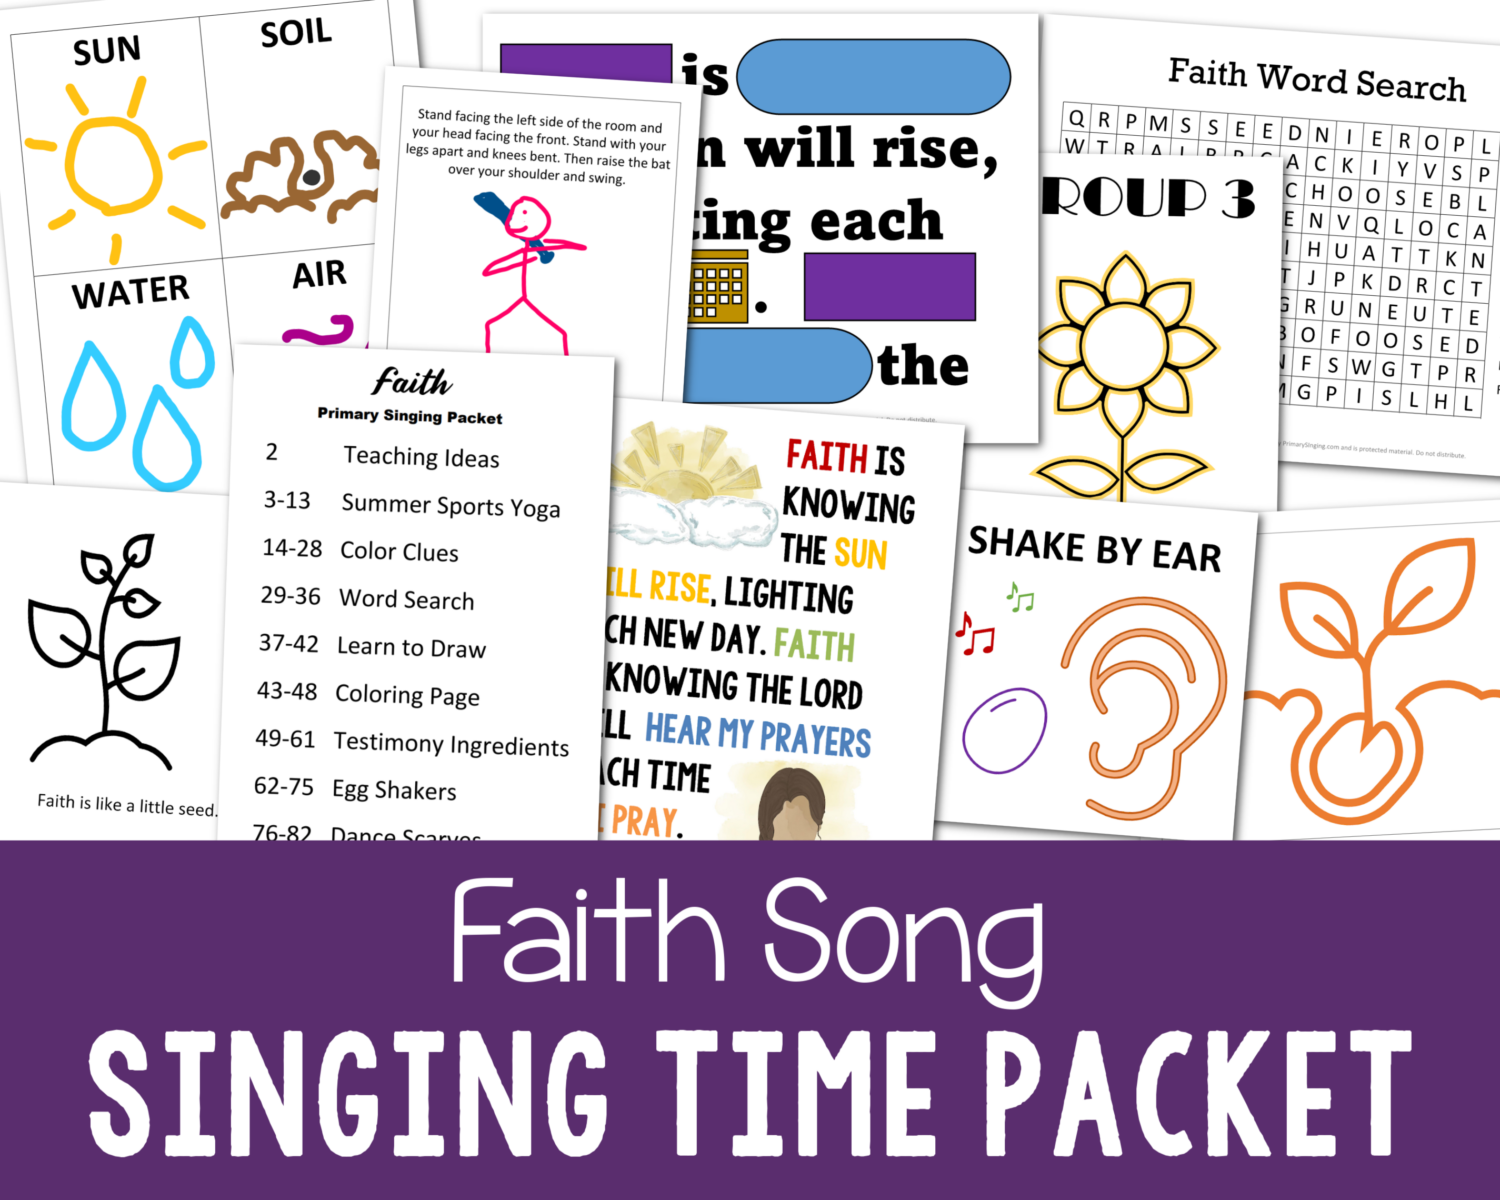 Shop Faith Singing Time Packet Singing time activities for the LDS Faith song and flip chart